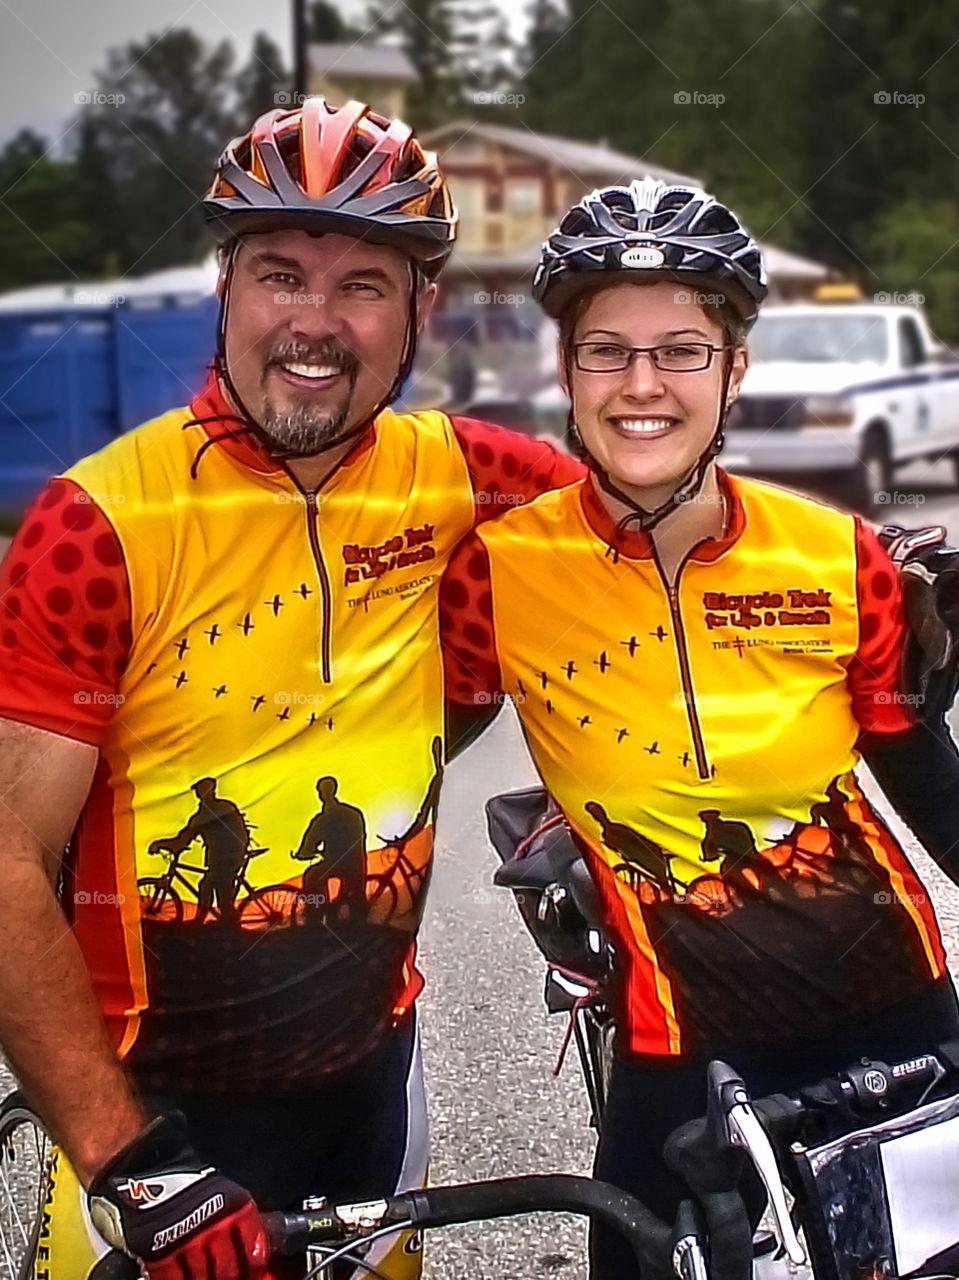 Biking for Breath. Riding the start of my daughter's 7000km, 71 day bike ride across Canada from coast to coast to raise money for The Lung Foundation.